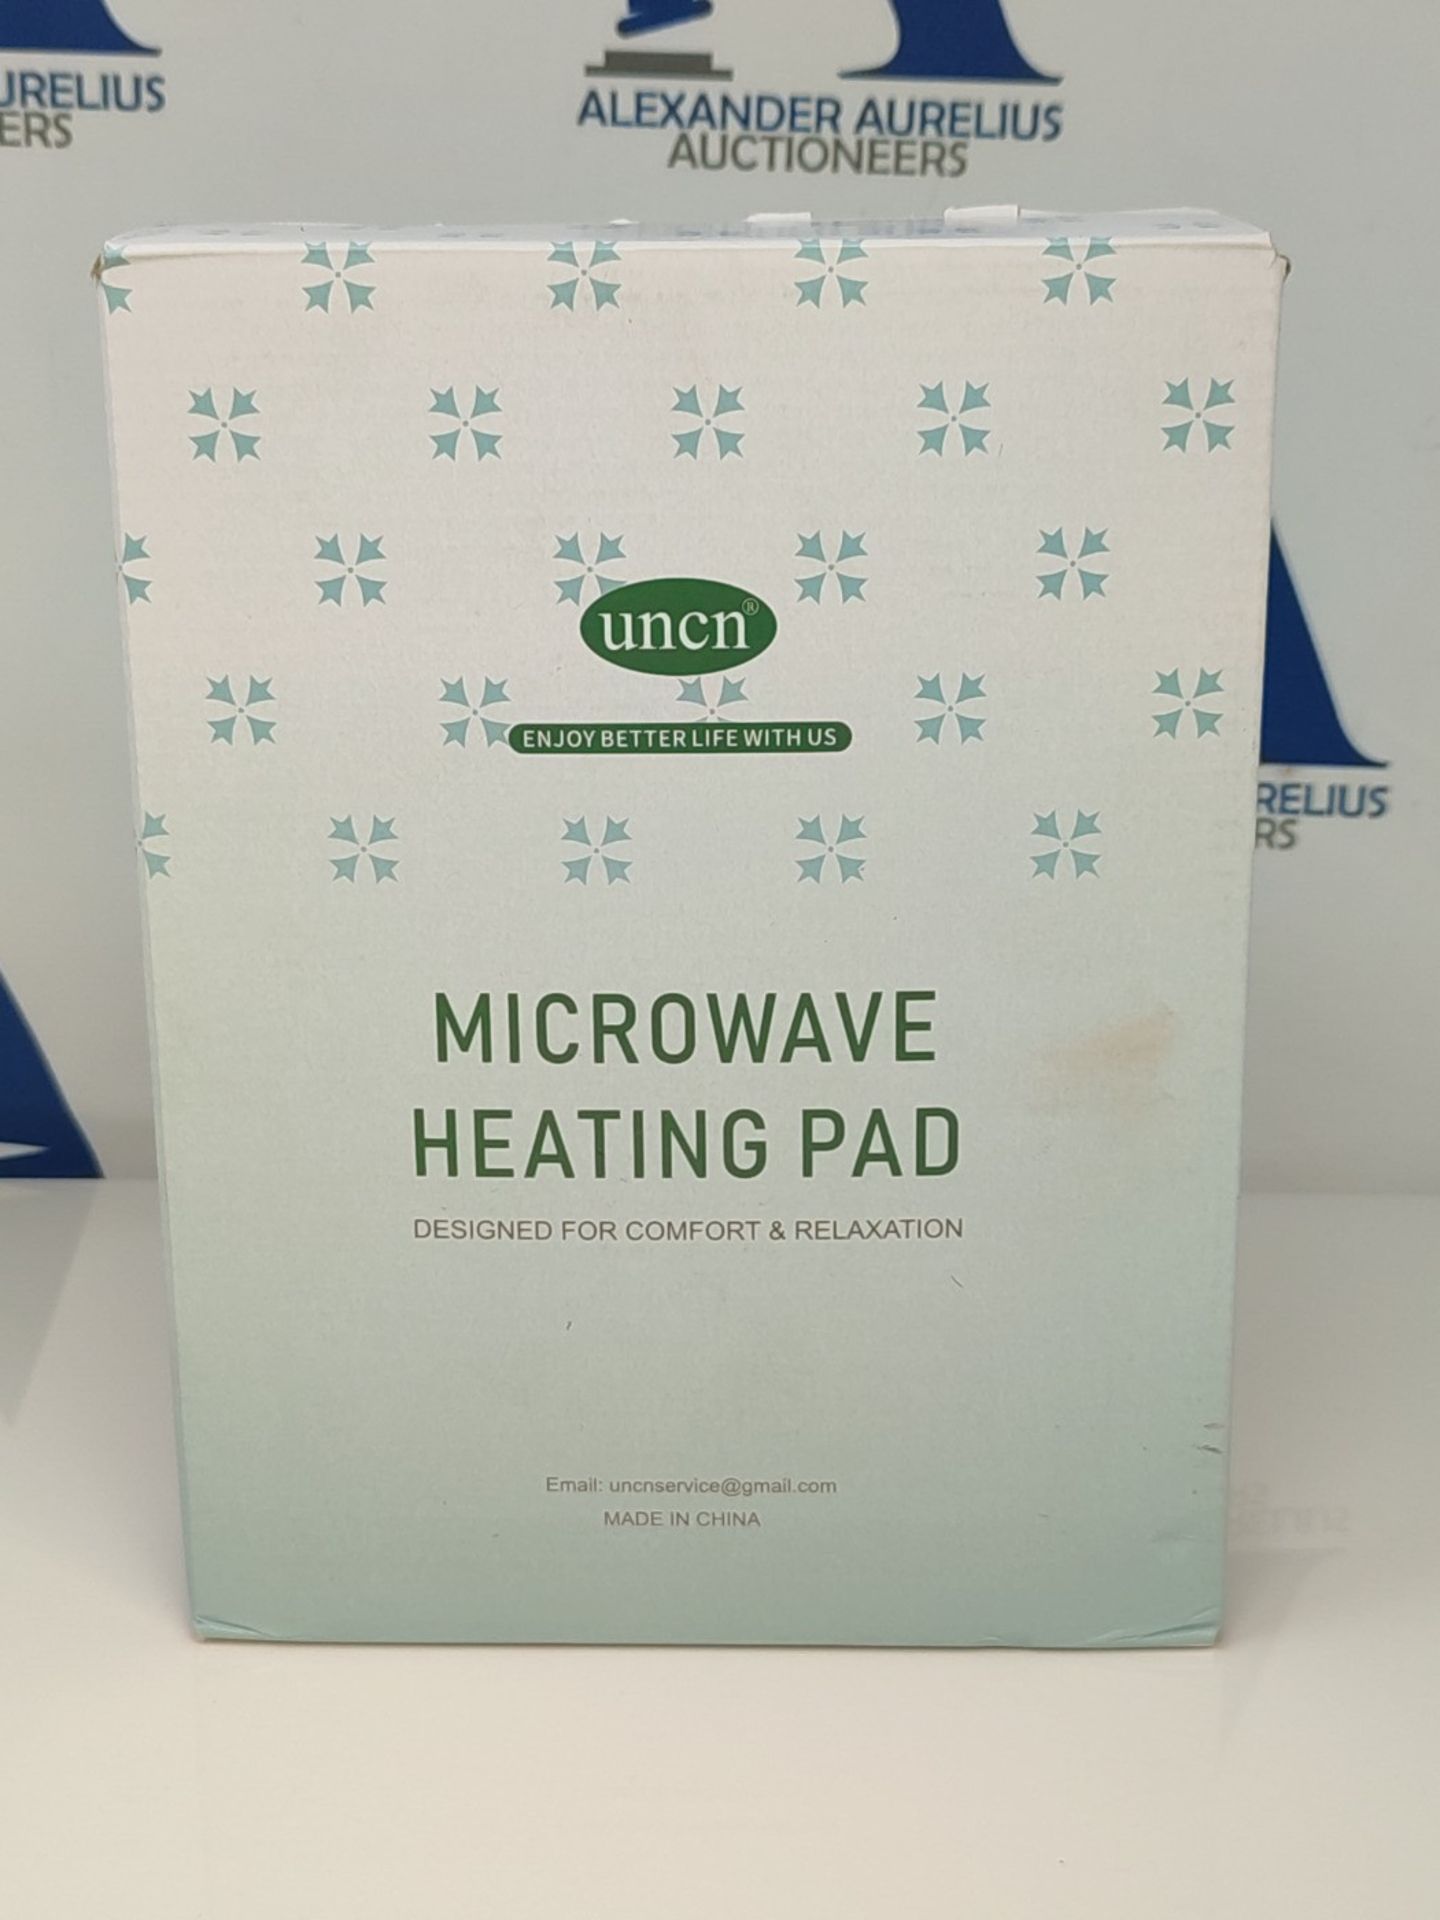 UNCN Wide Microwave Heat Pad 15 * 9" with Washable Cover - Unscented Wheat Bag for Bac - Image 2 of 3